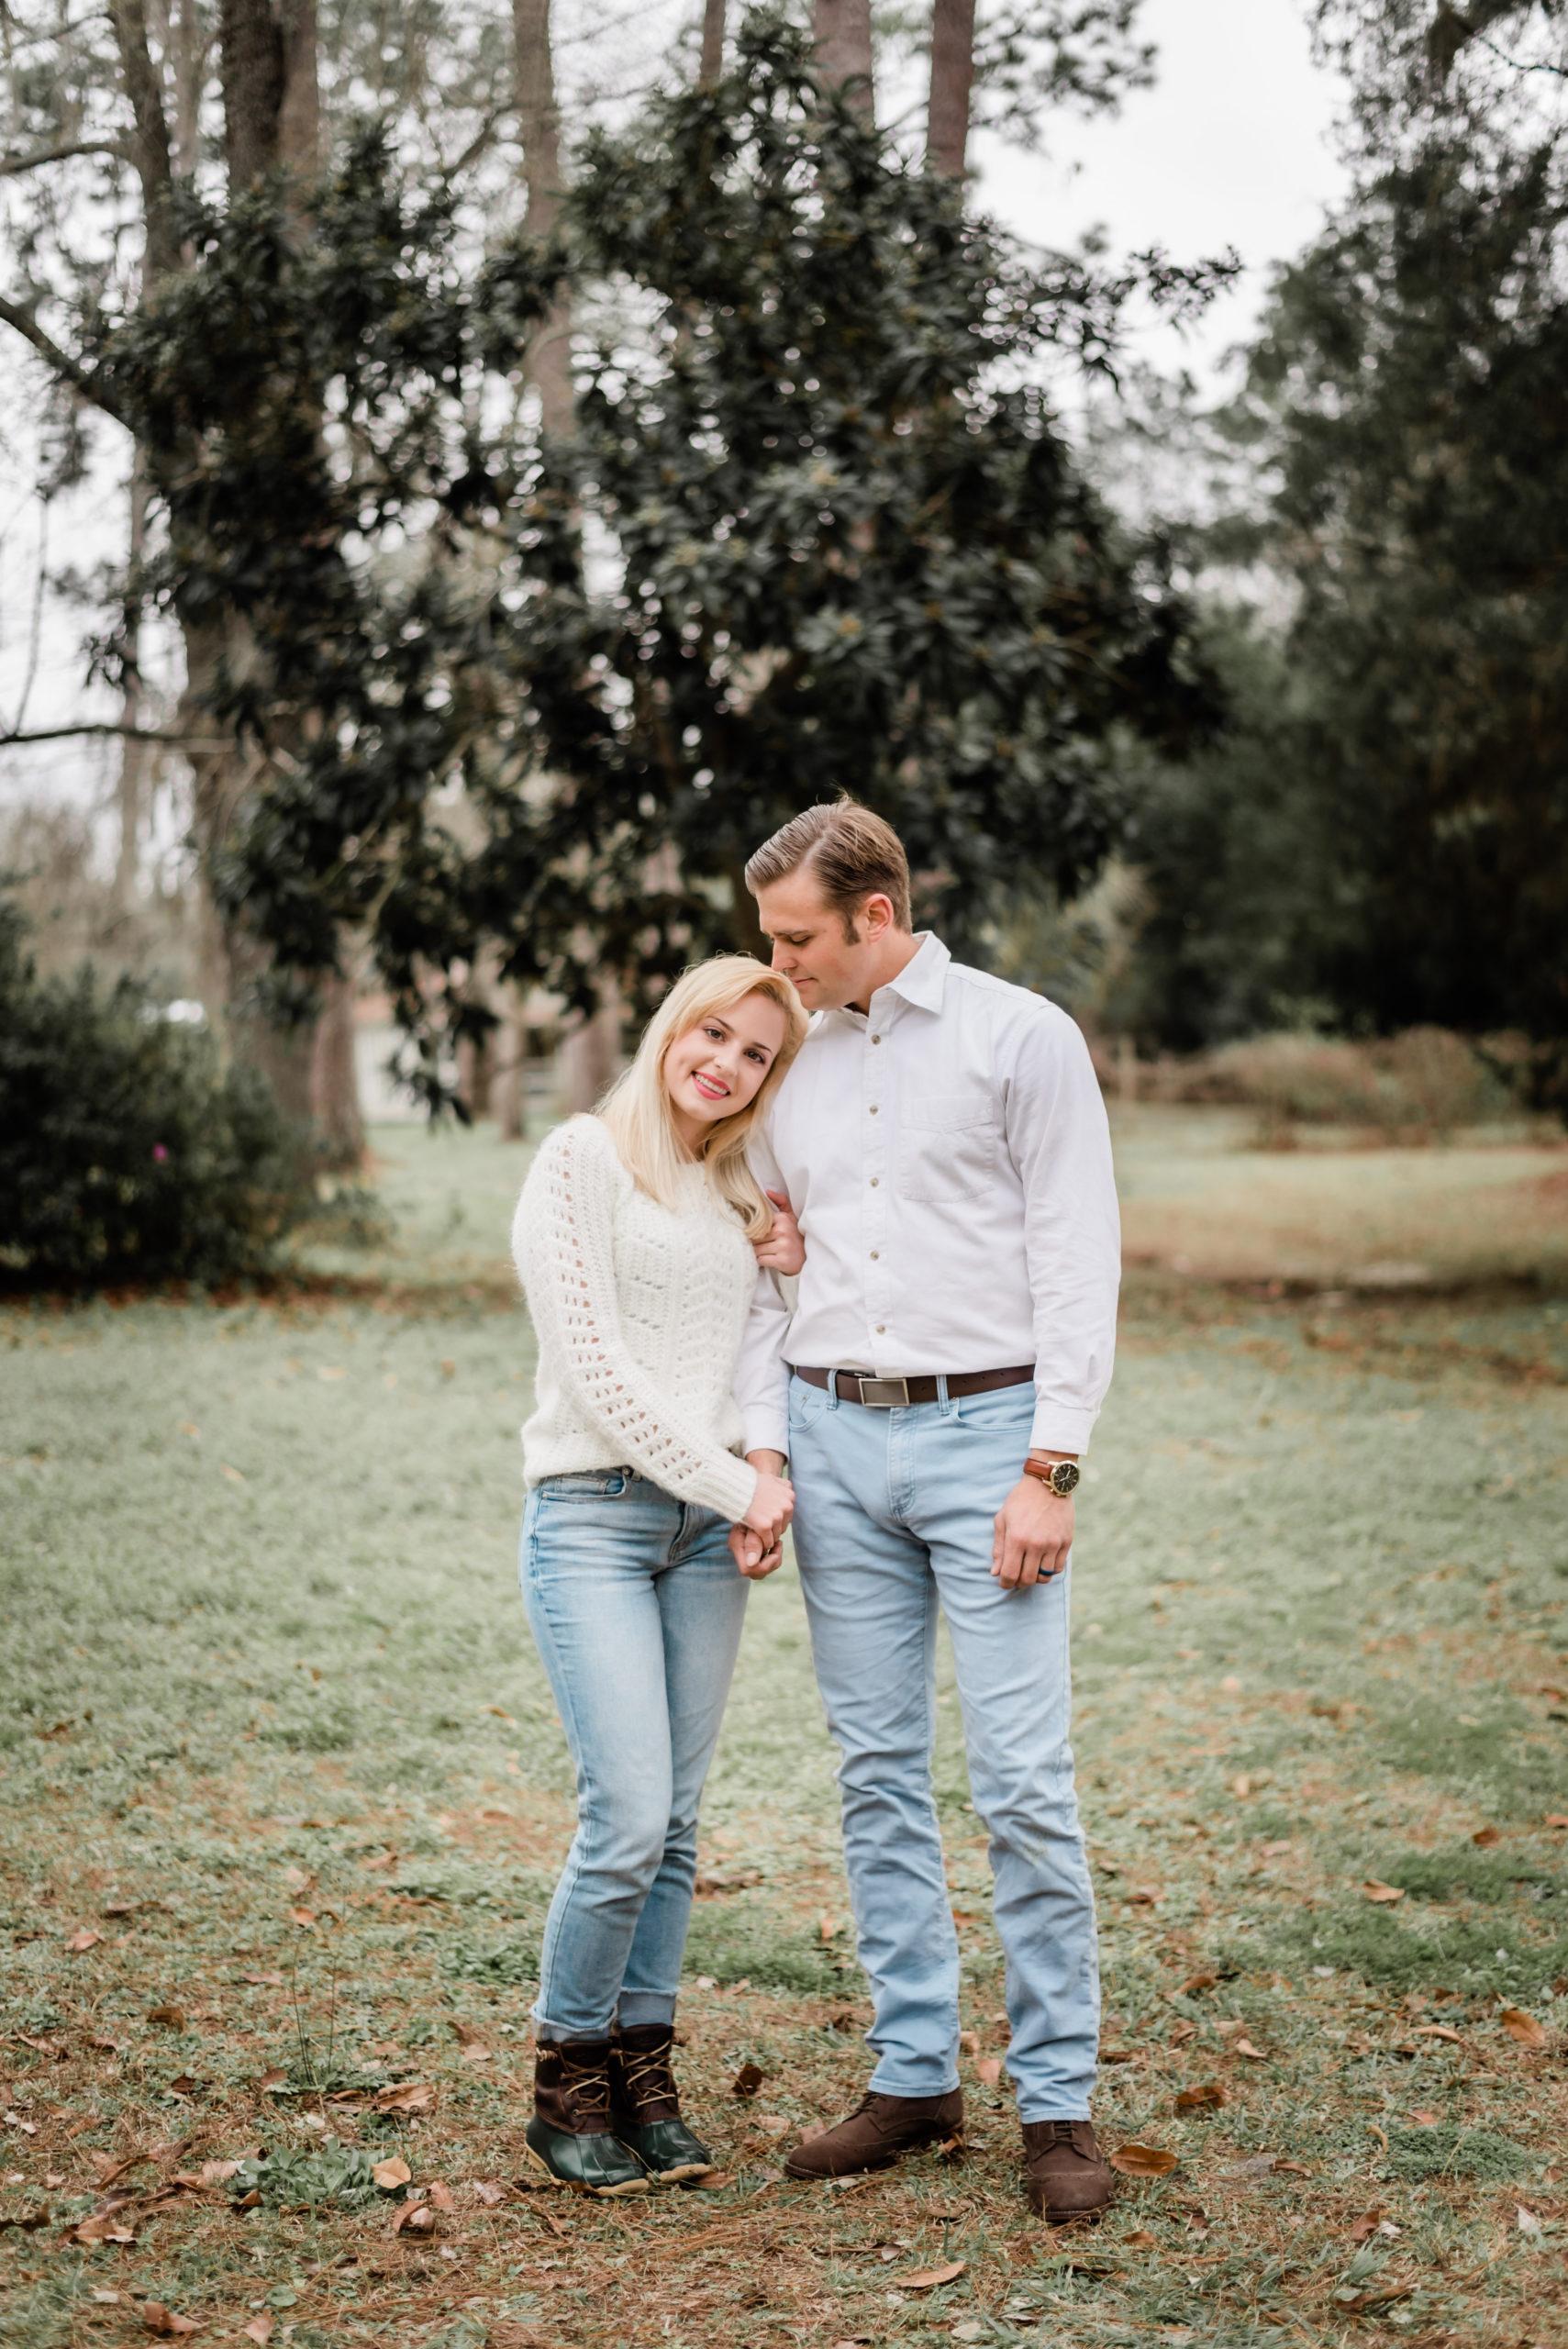 engagement session at heritage park and gardens in live oak Florida by Black tie and co